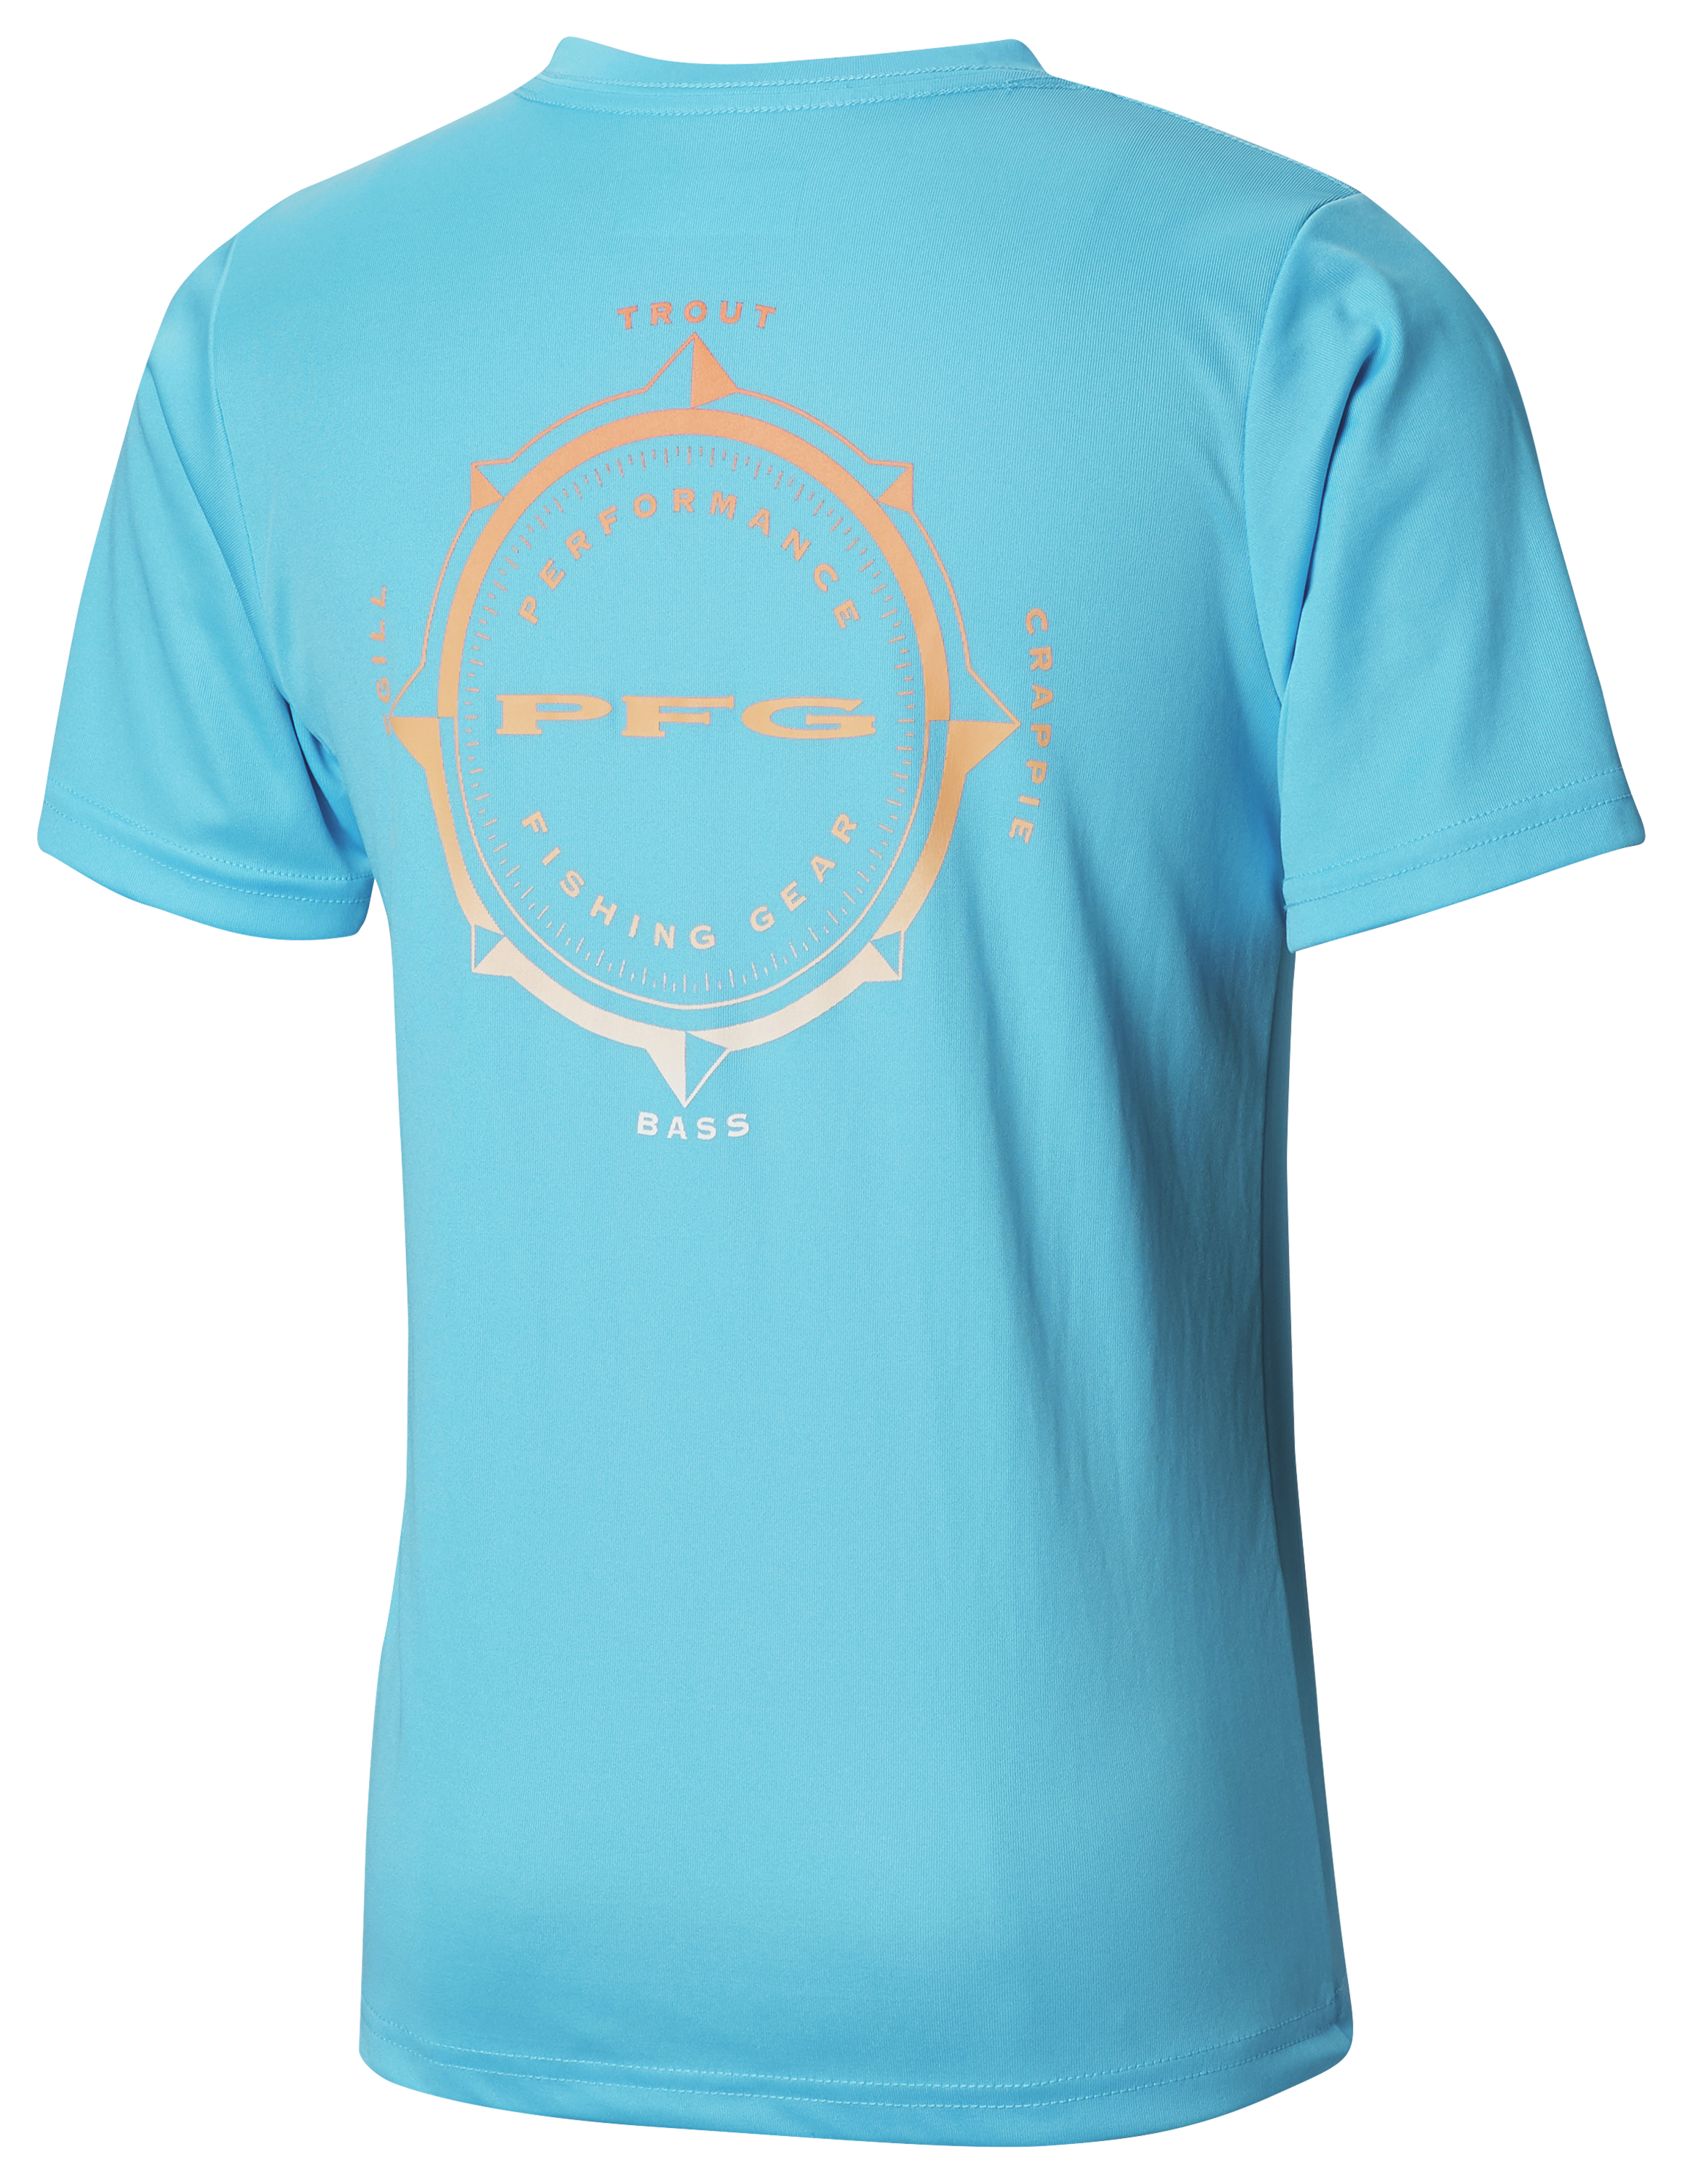 Columbia PFG Offshore Riptide Compass T-Shirt for Kids